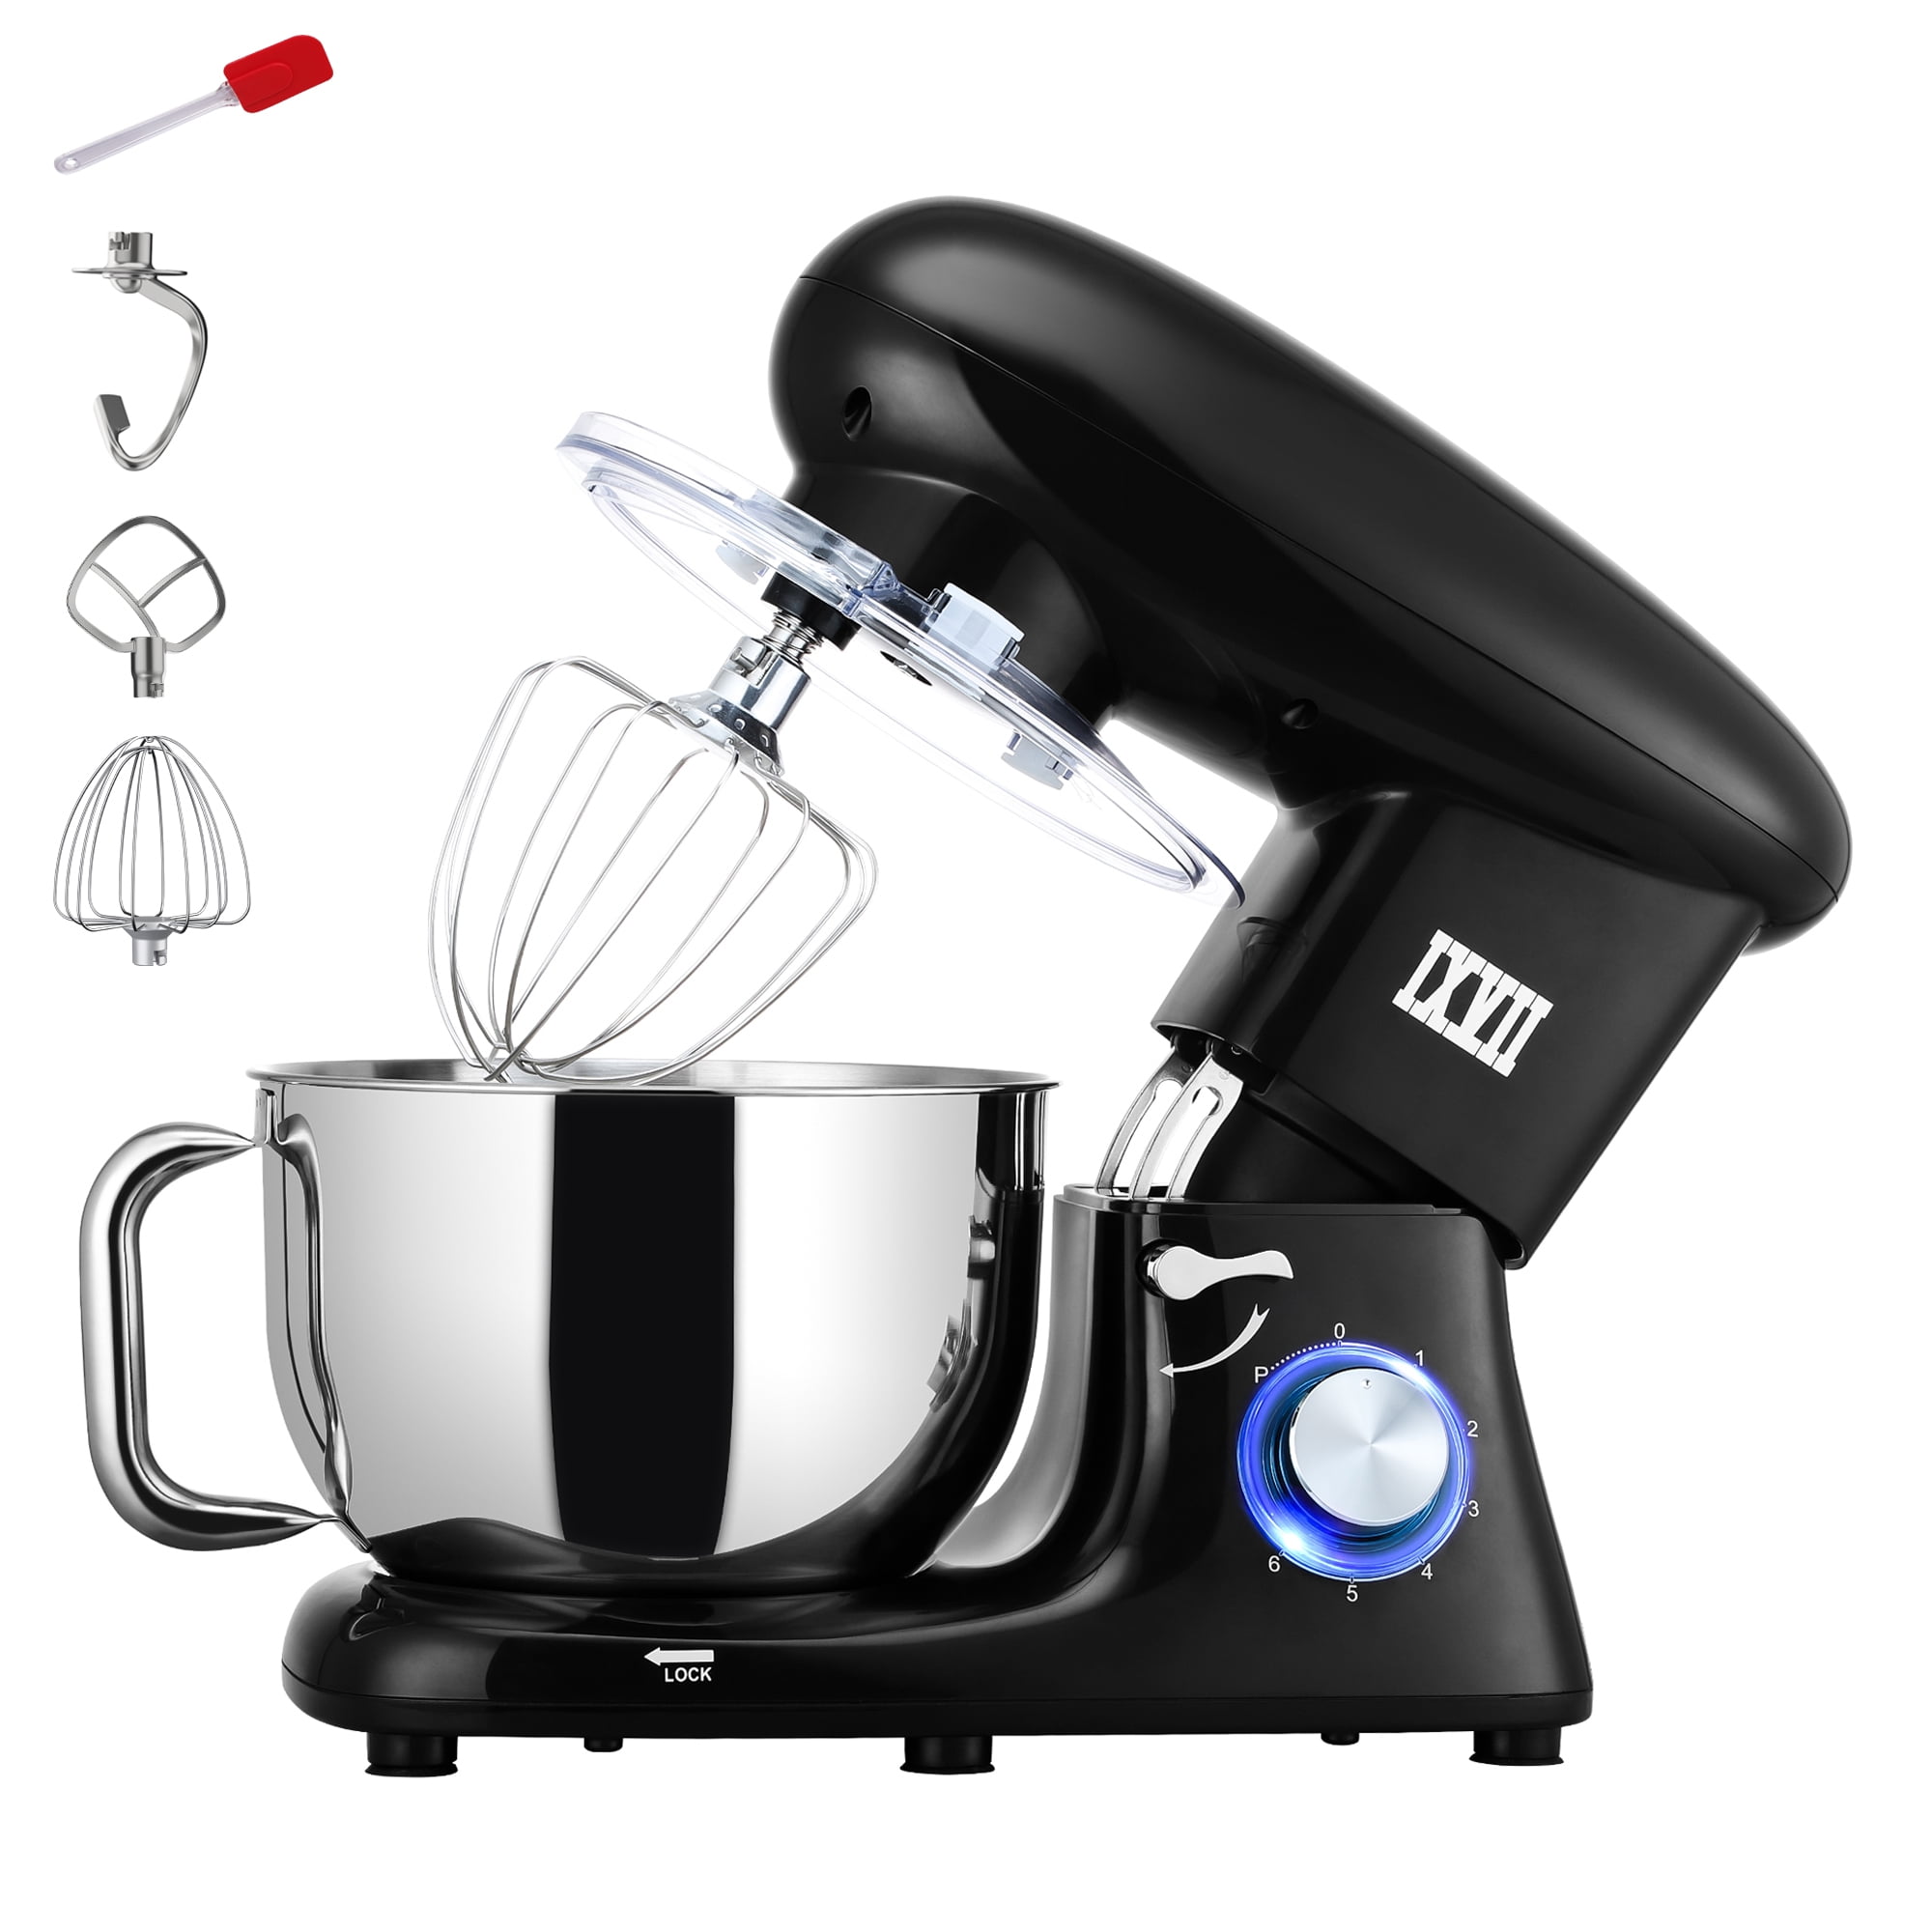 600W 220V Electric Stand Mixer Machine Whisk Beater Bread Cake